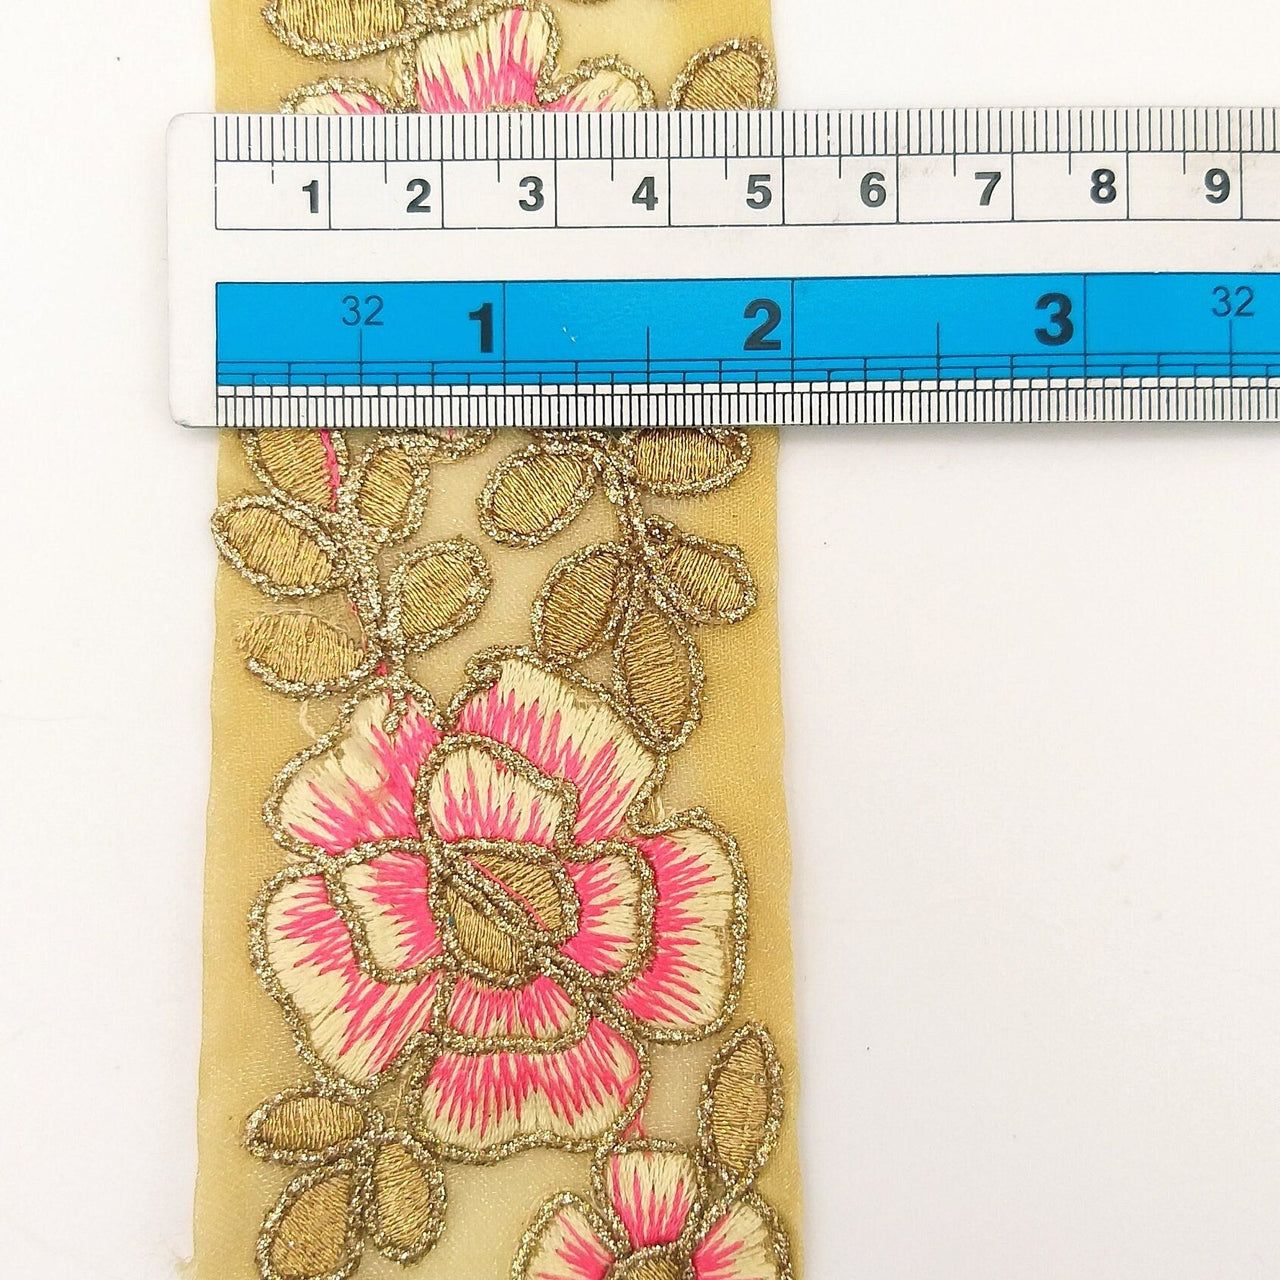 Pink and Gold Floral Embroidery Trimming, Embroidered Roses Flowers Trim, Sheer Fabric Lace